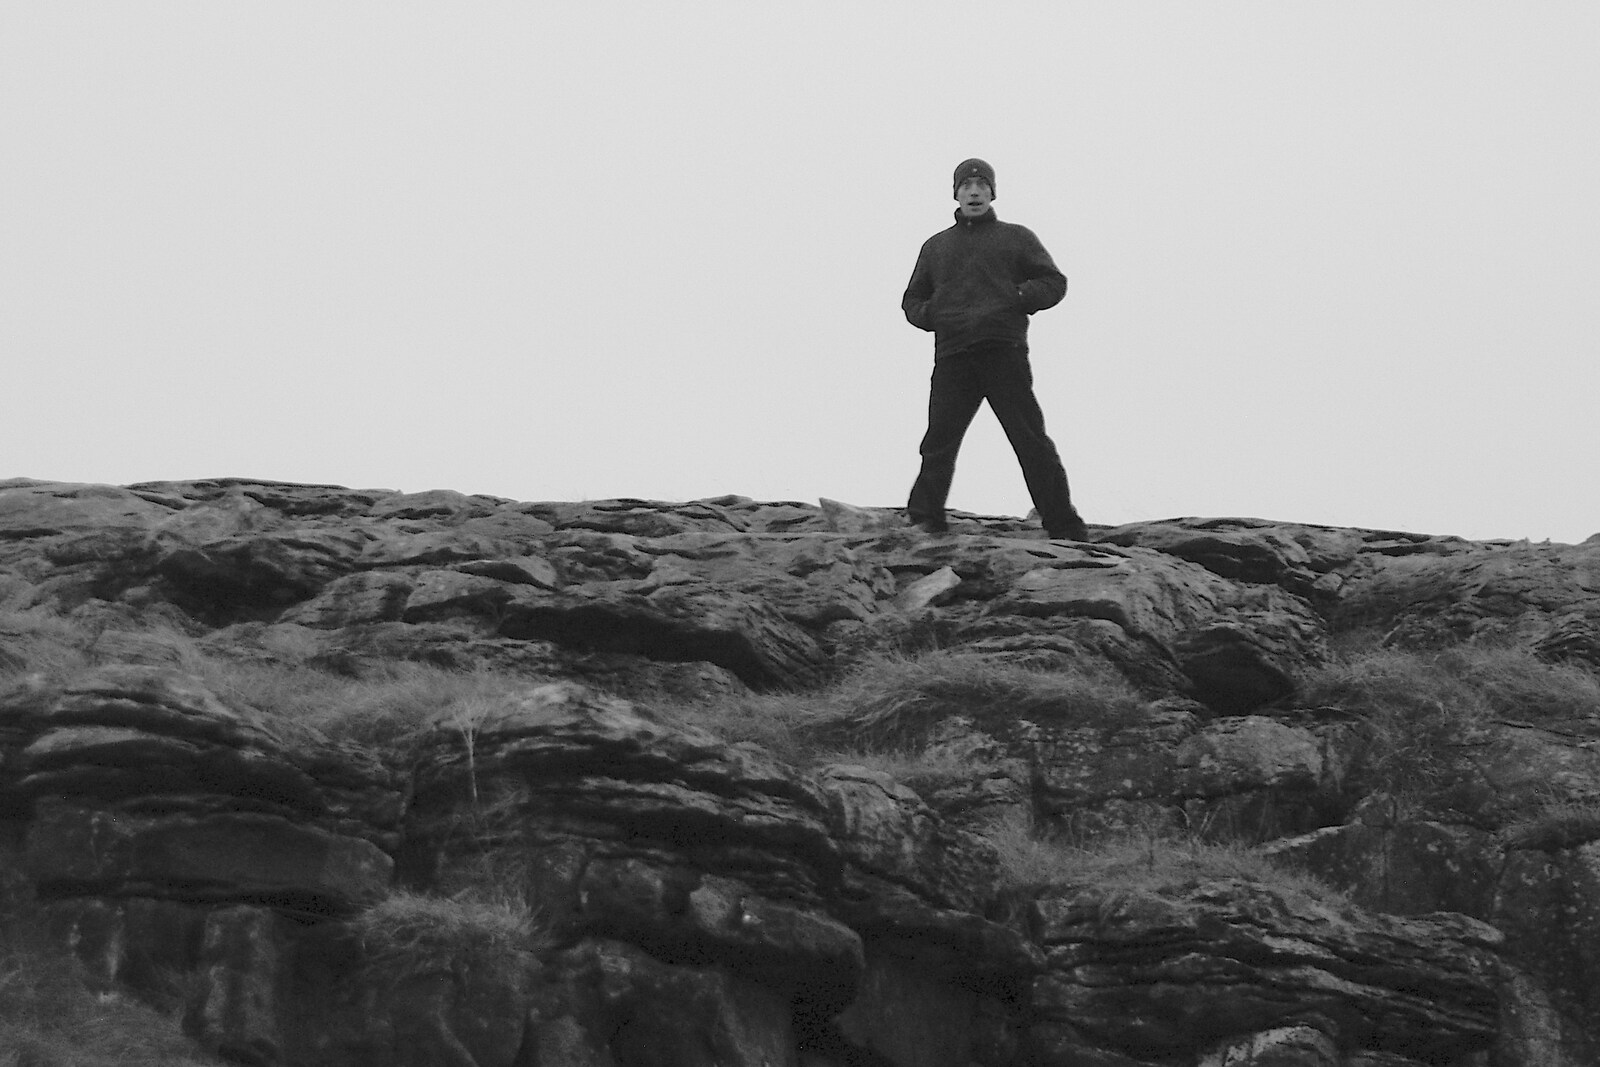 Gary stands, watching, on the top of a cliff from Corofin, Ennistymon and The Burran, County Clare, Western Ireland - 27th October 2006